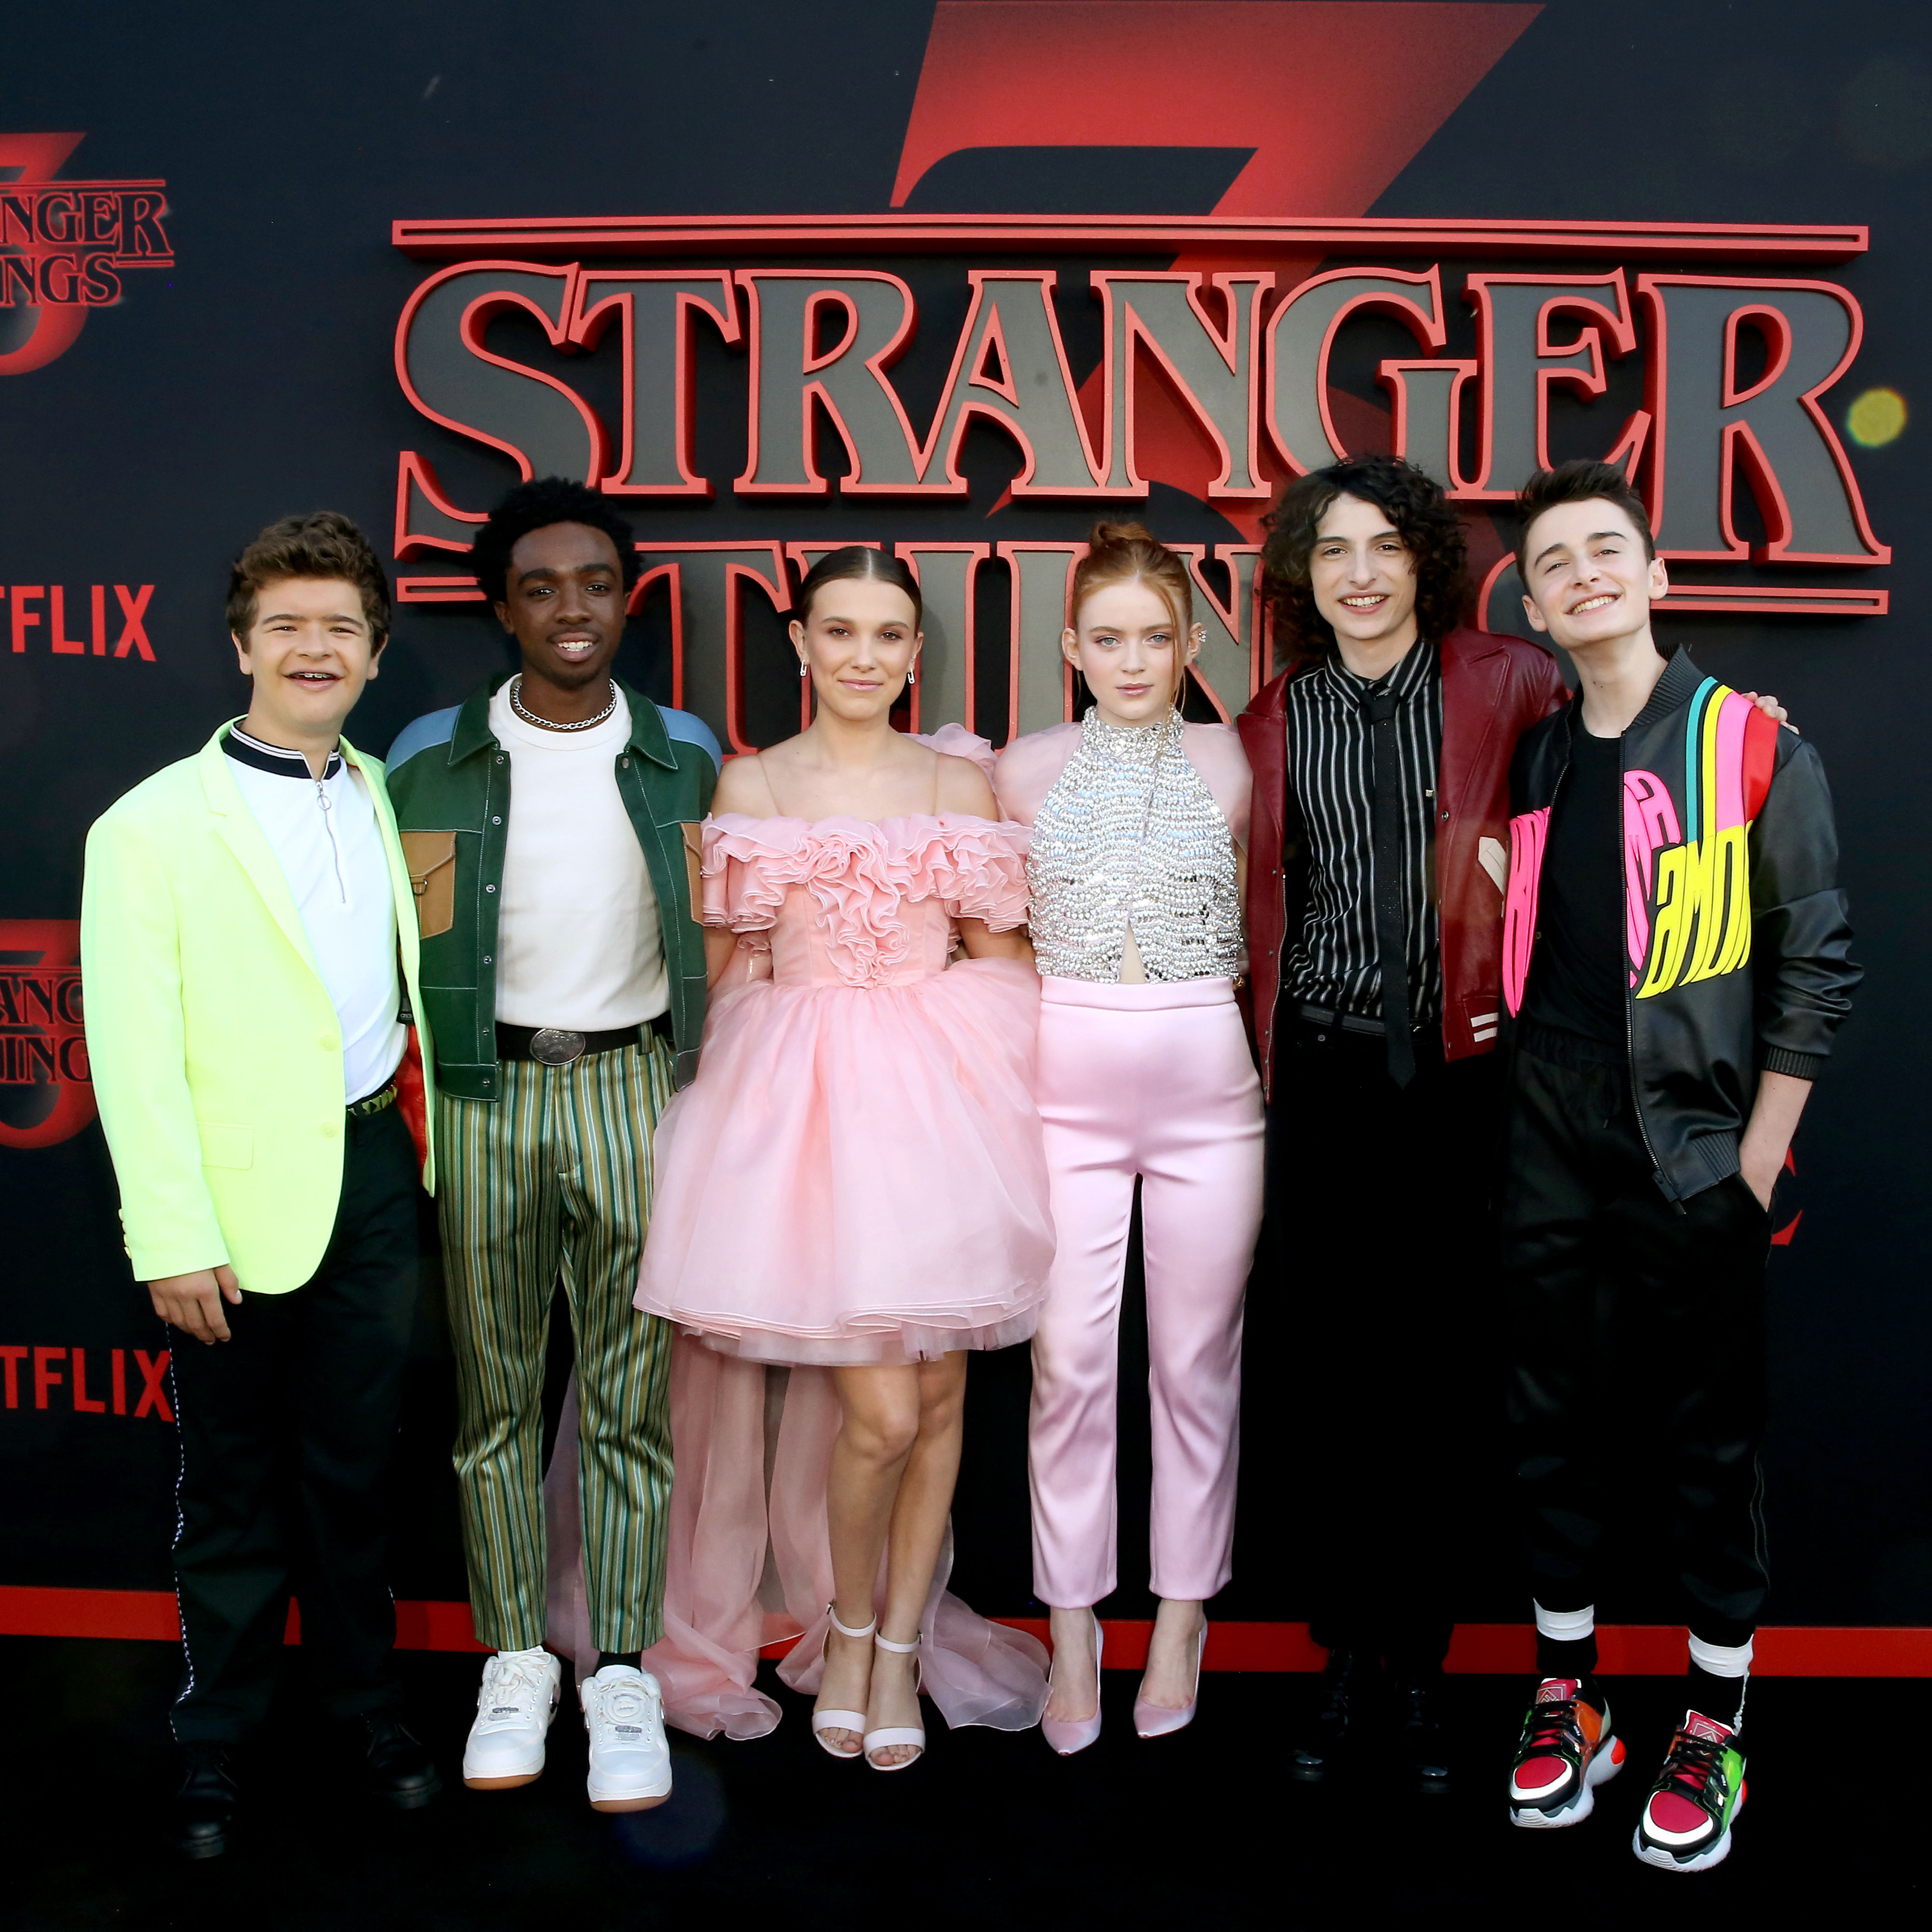 New 'Stranger Things' Trailer Gives Final Look Into Season 3 Before July  Premiere